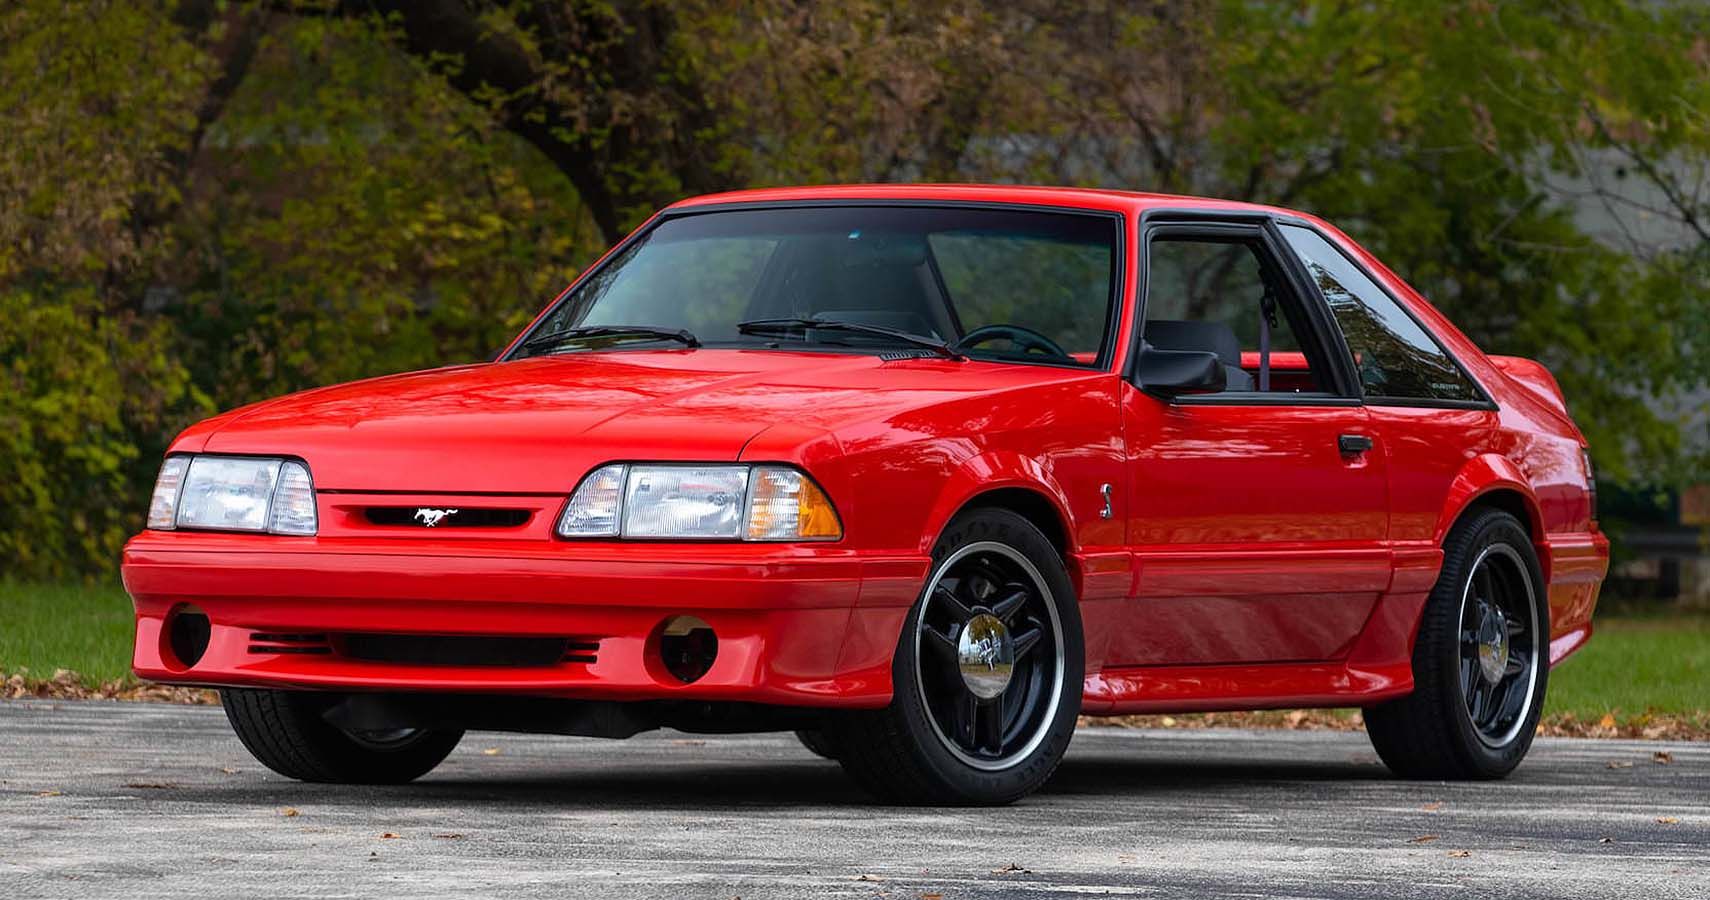 10 Things Only Real Muscle Car Fans Know About The Fox Body Mustang